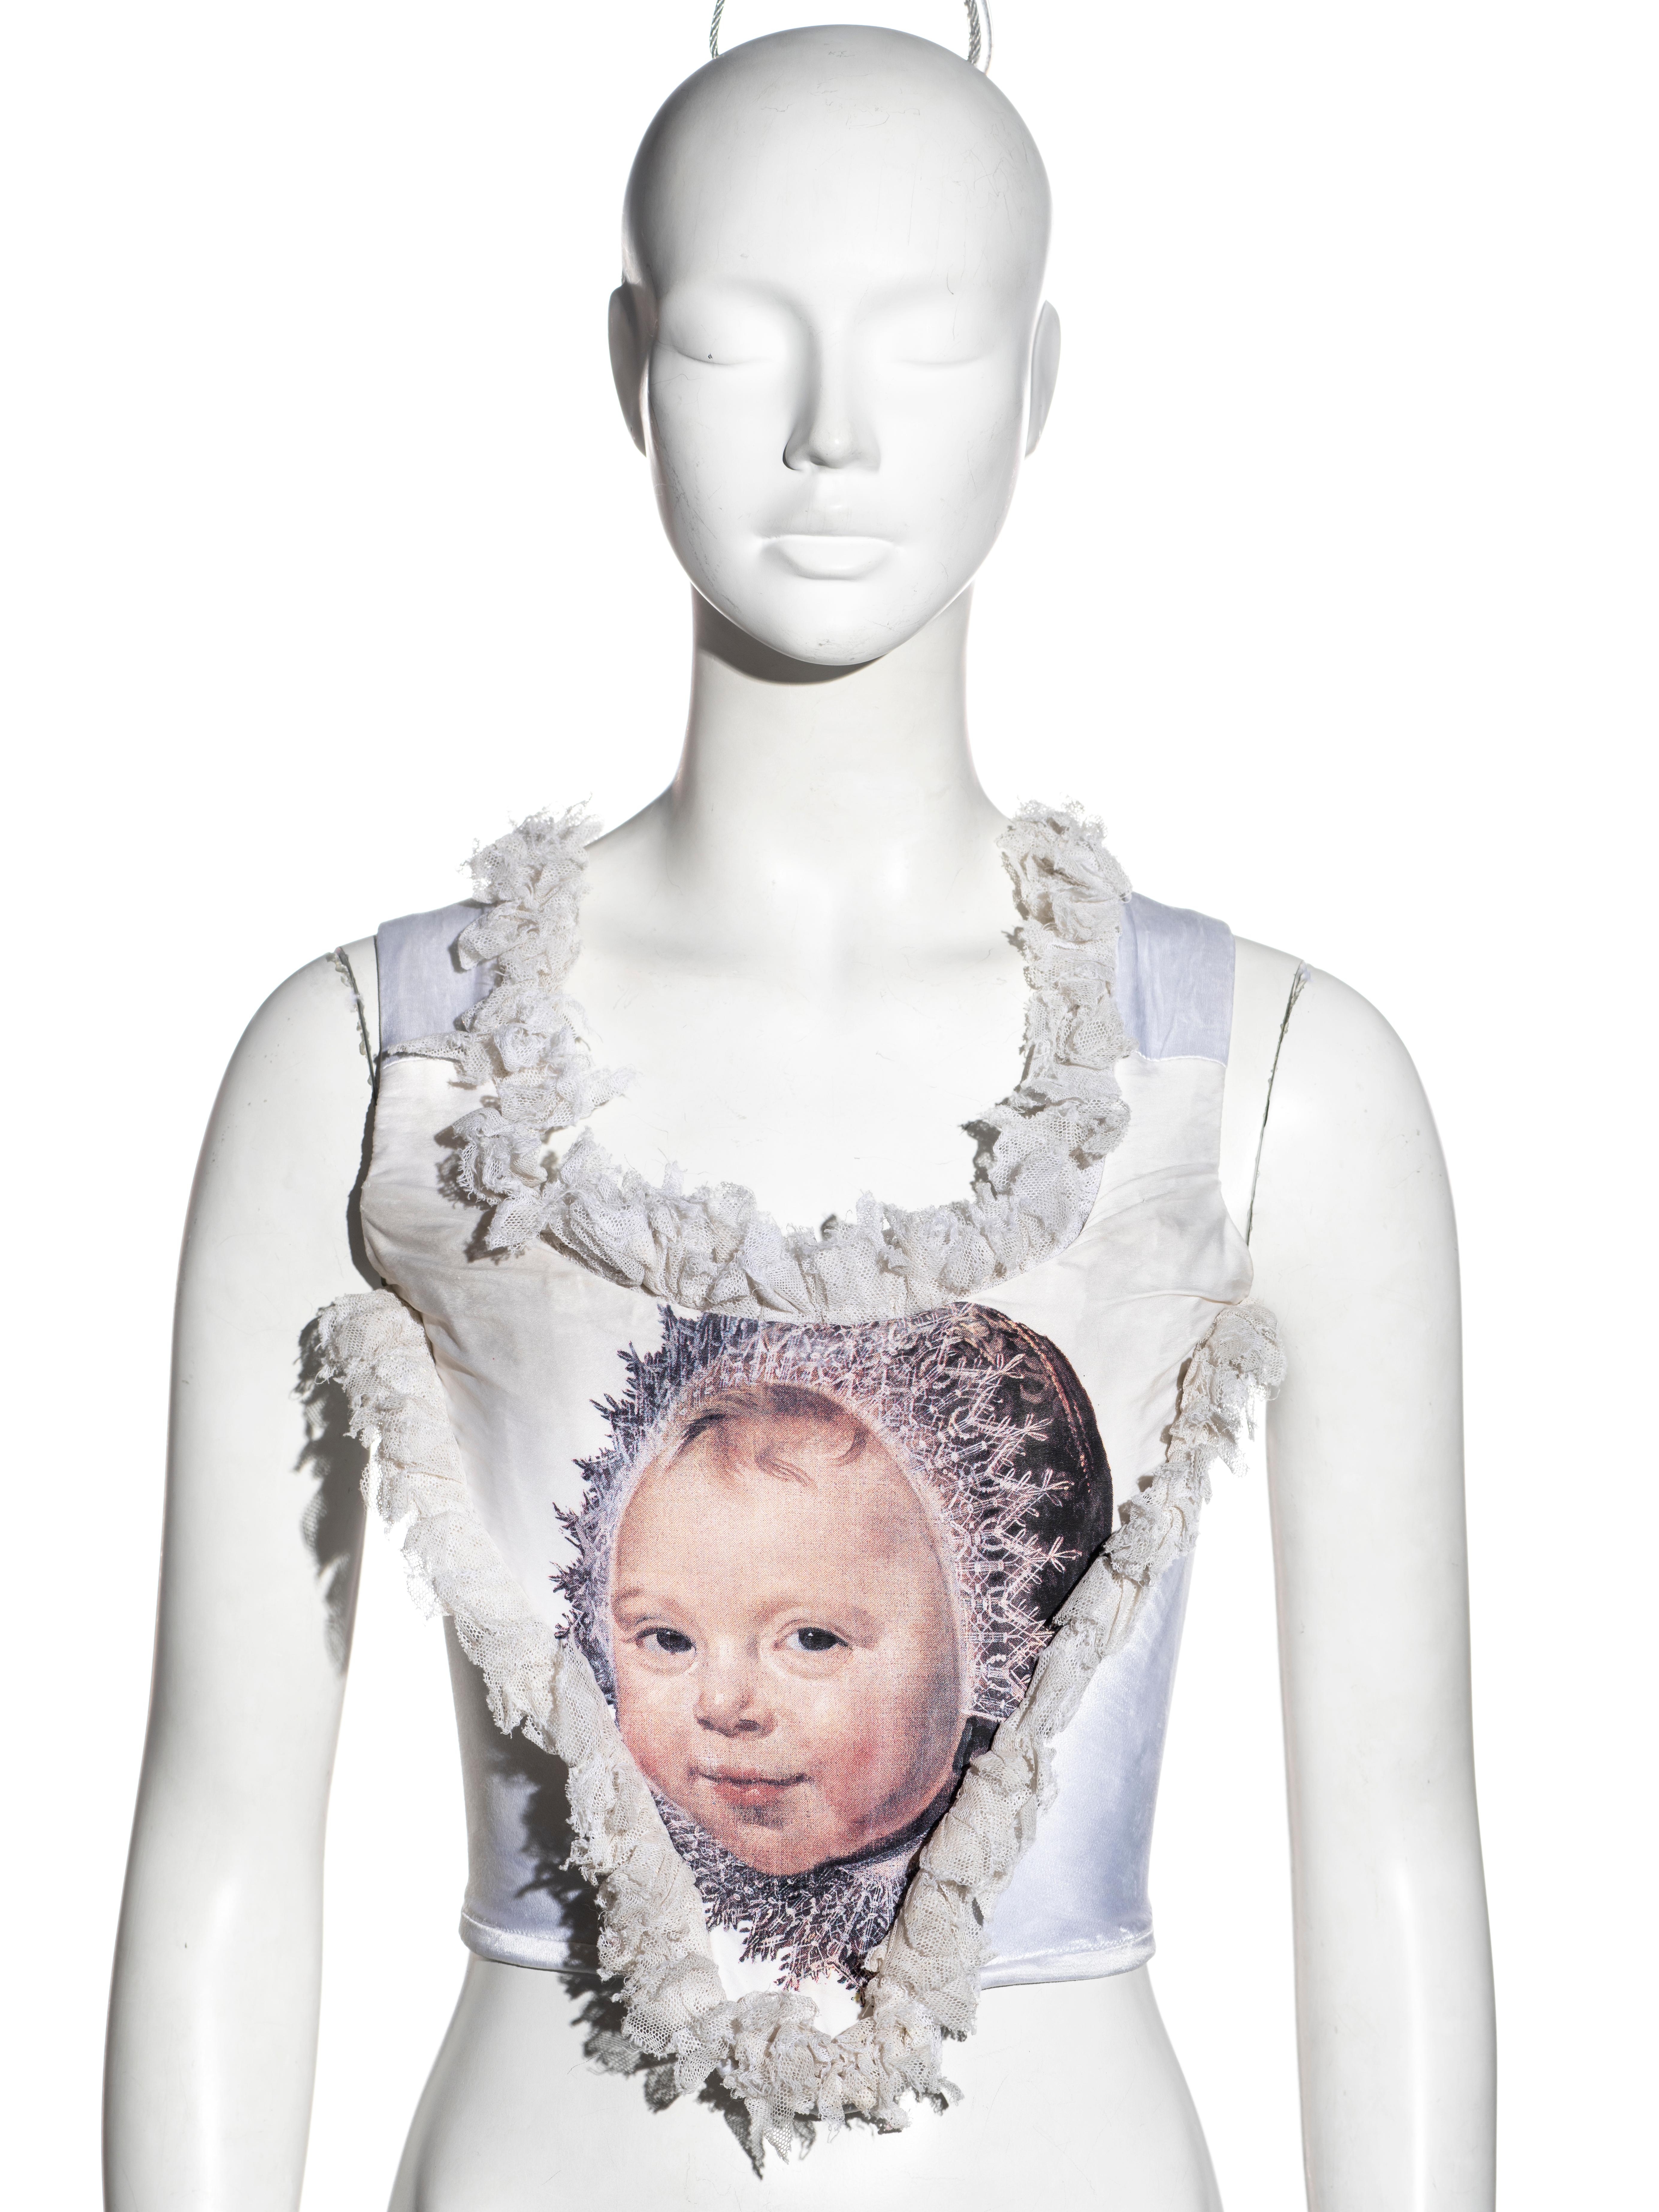 ▪ Rare Vivienne Westwood corset top
▪ Baby print from a detail of Frans Hals - Catharina Hooft with her Nurse c. 1620
▪ Ruffled tulle trim 
▪ Centre-back zipper 
▪ UK 12
▪ Fall-Winter 1992
▪ Made in England